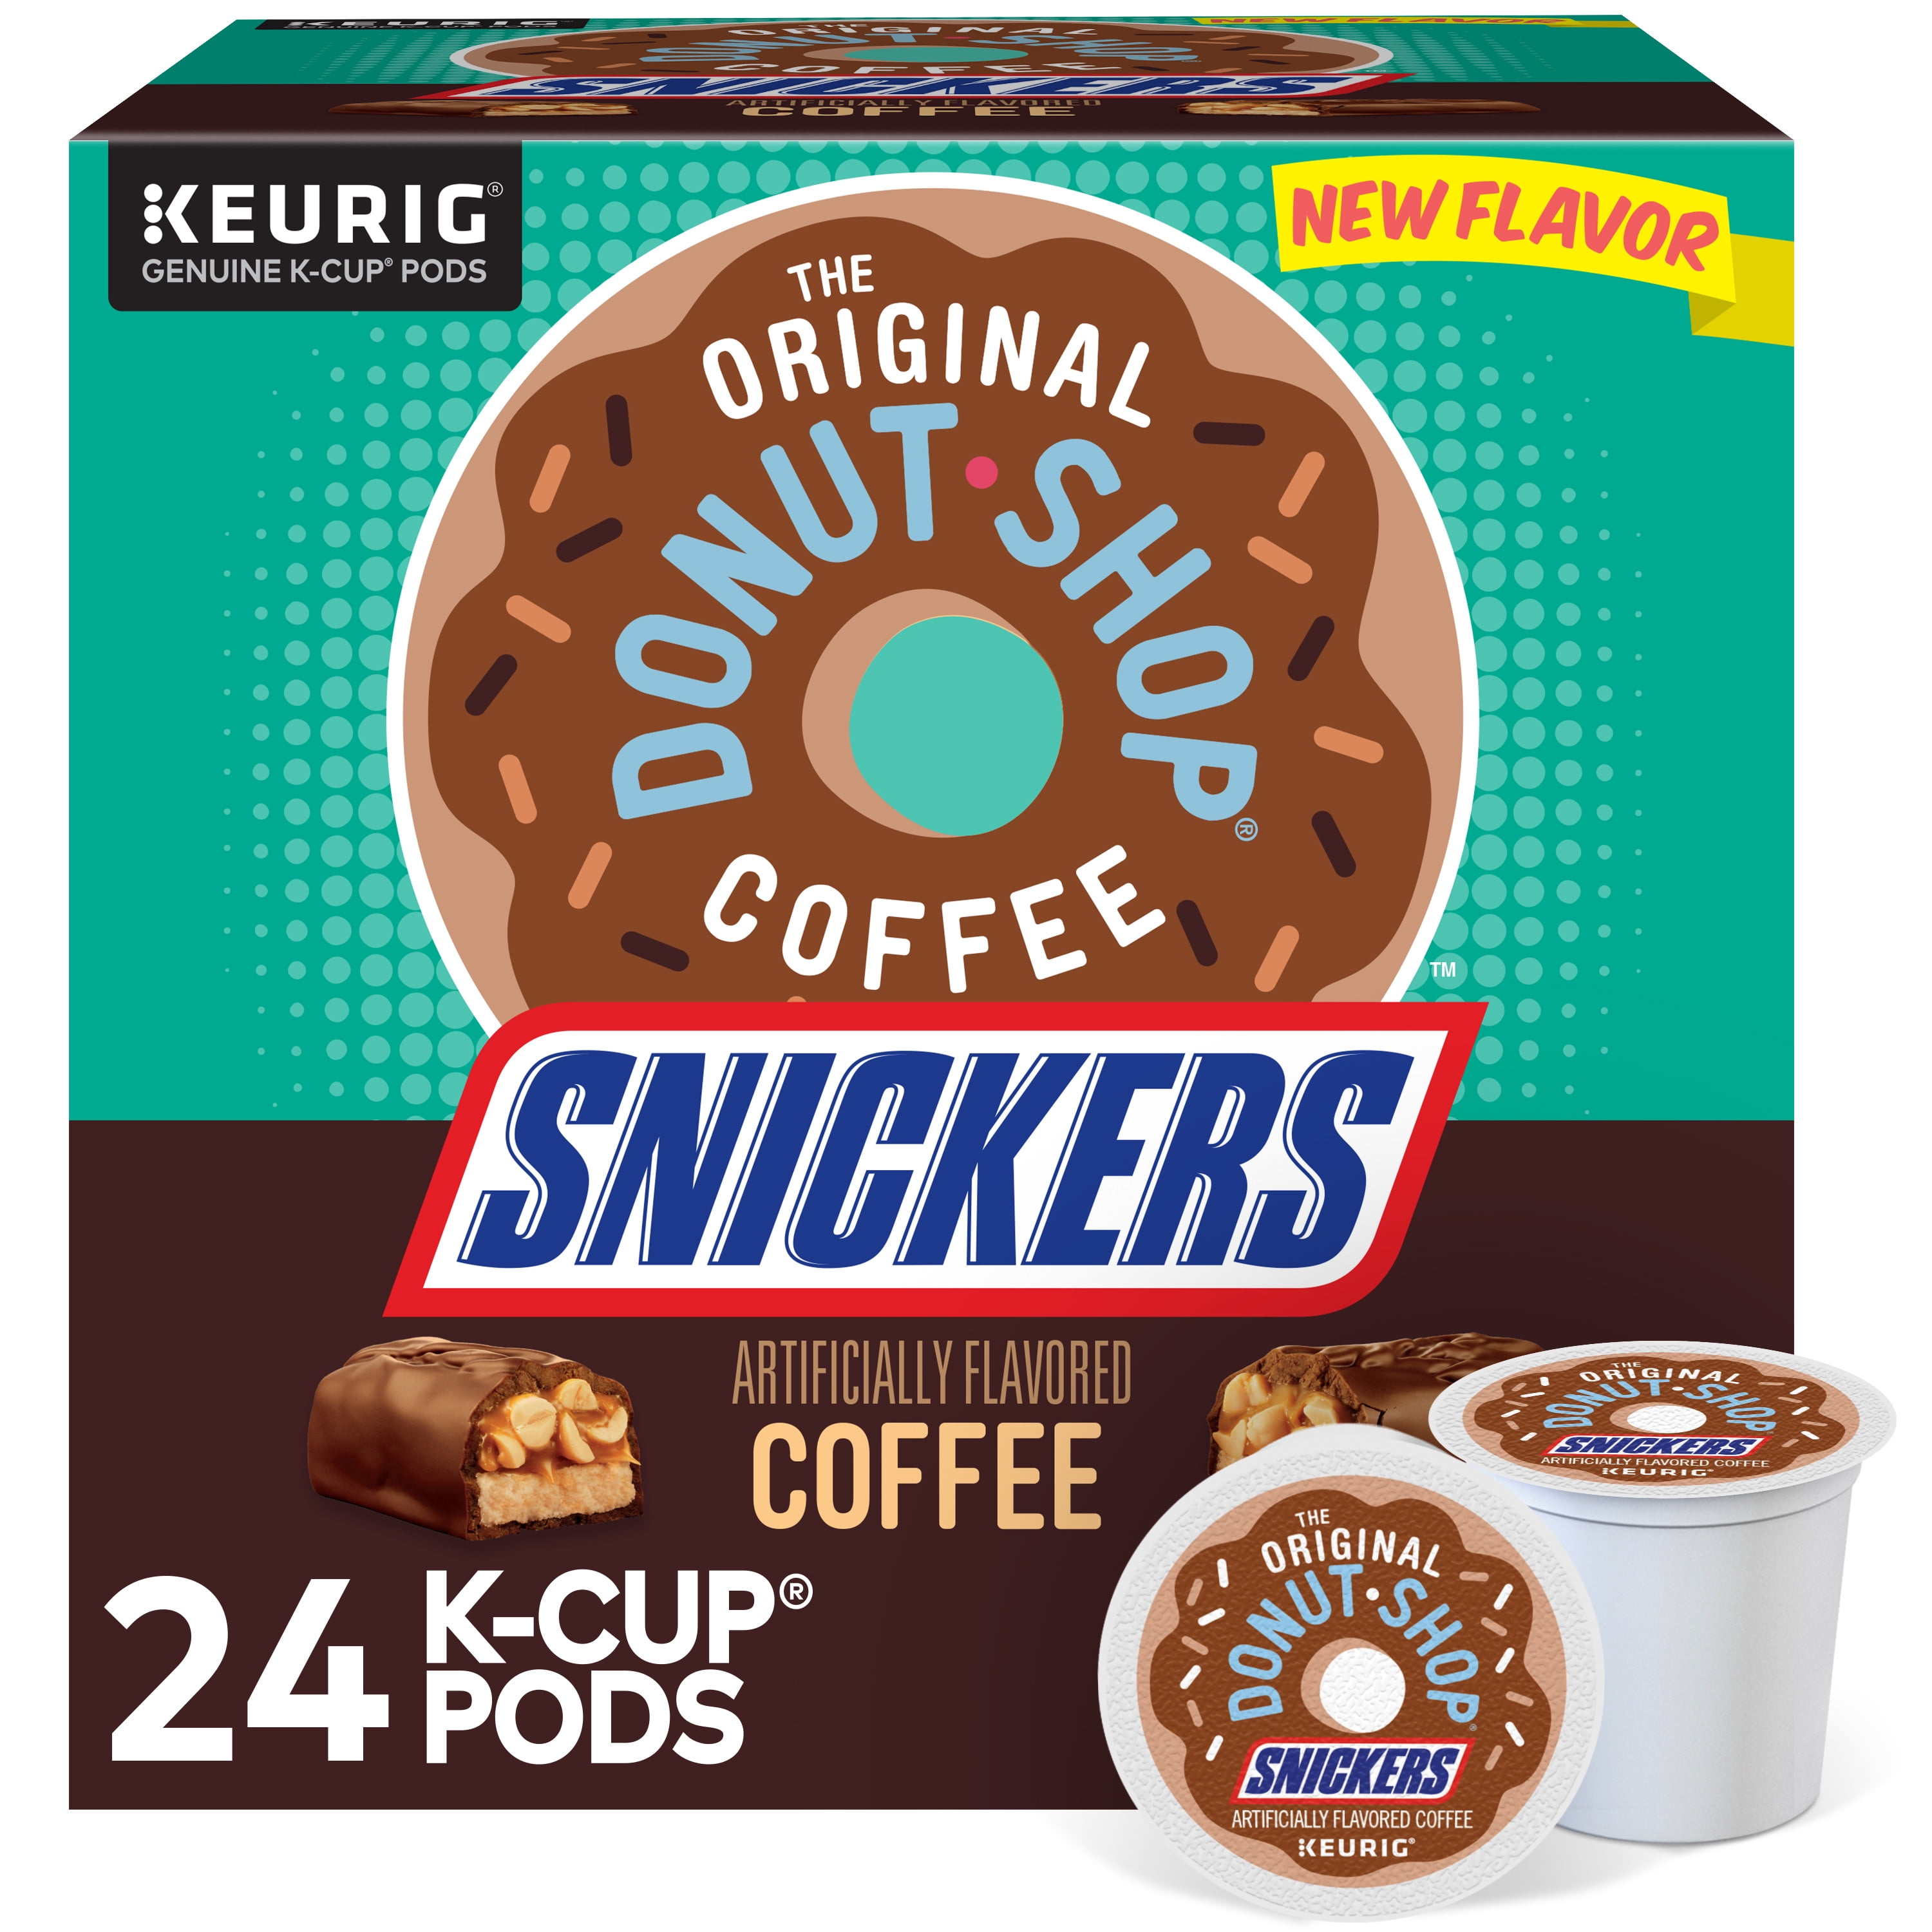 The Original Donut Shop, Snickers Flavored K-Cup Coffee Pods, 24 Count